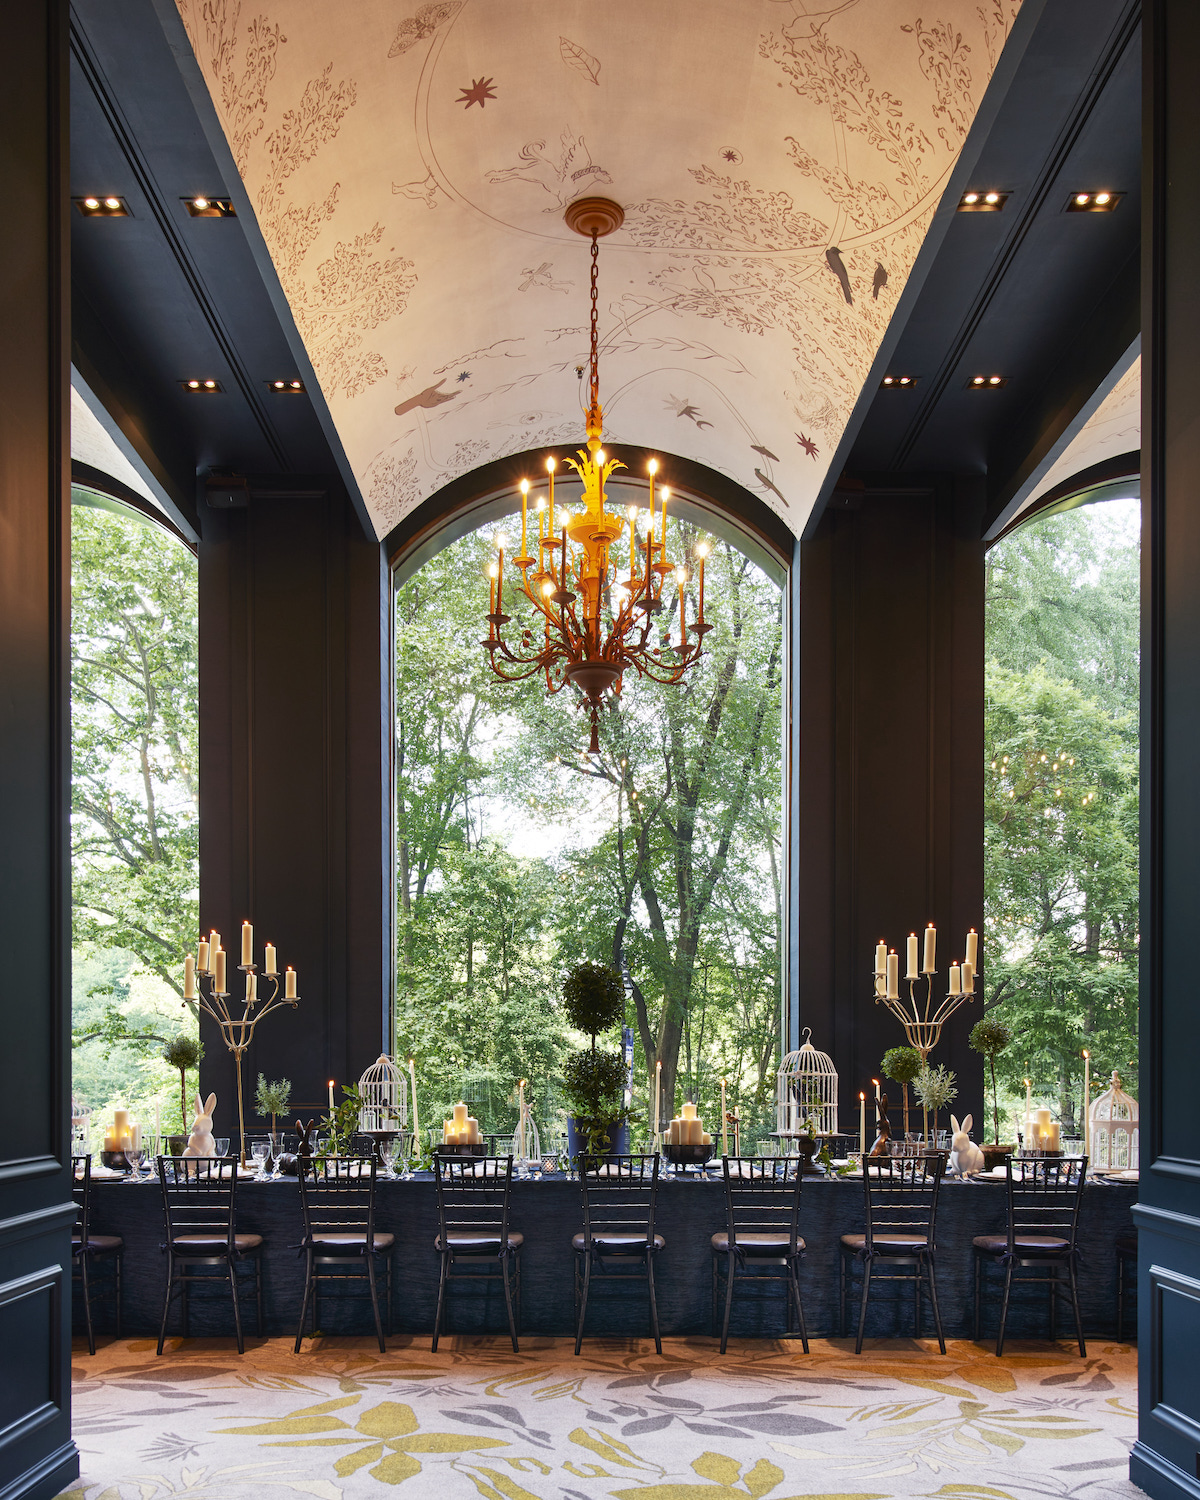 Dramatic chandelier above large dining table